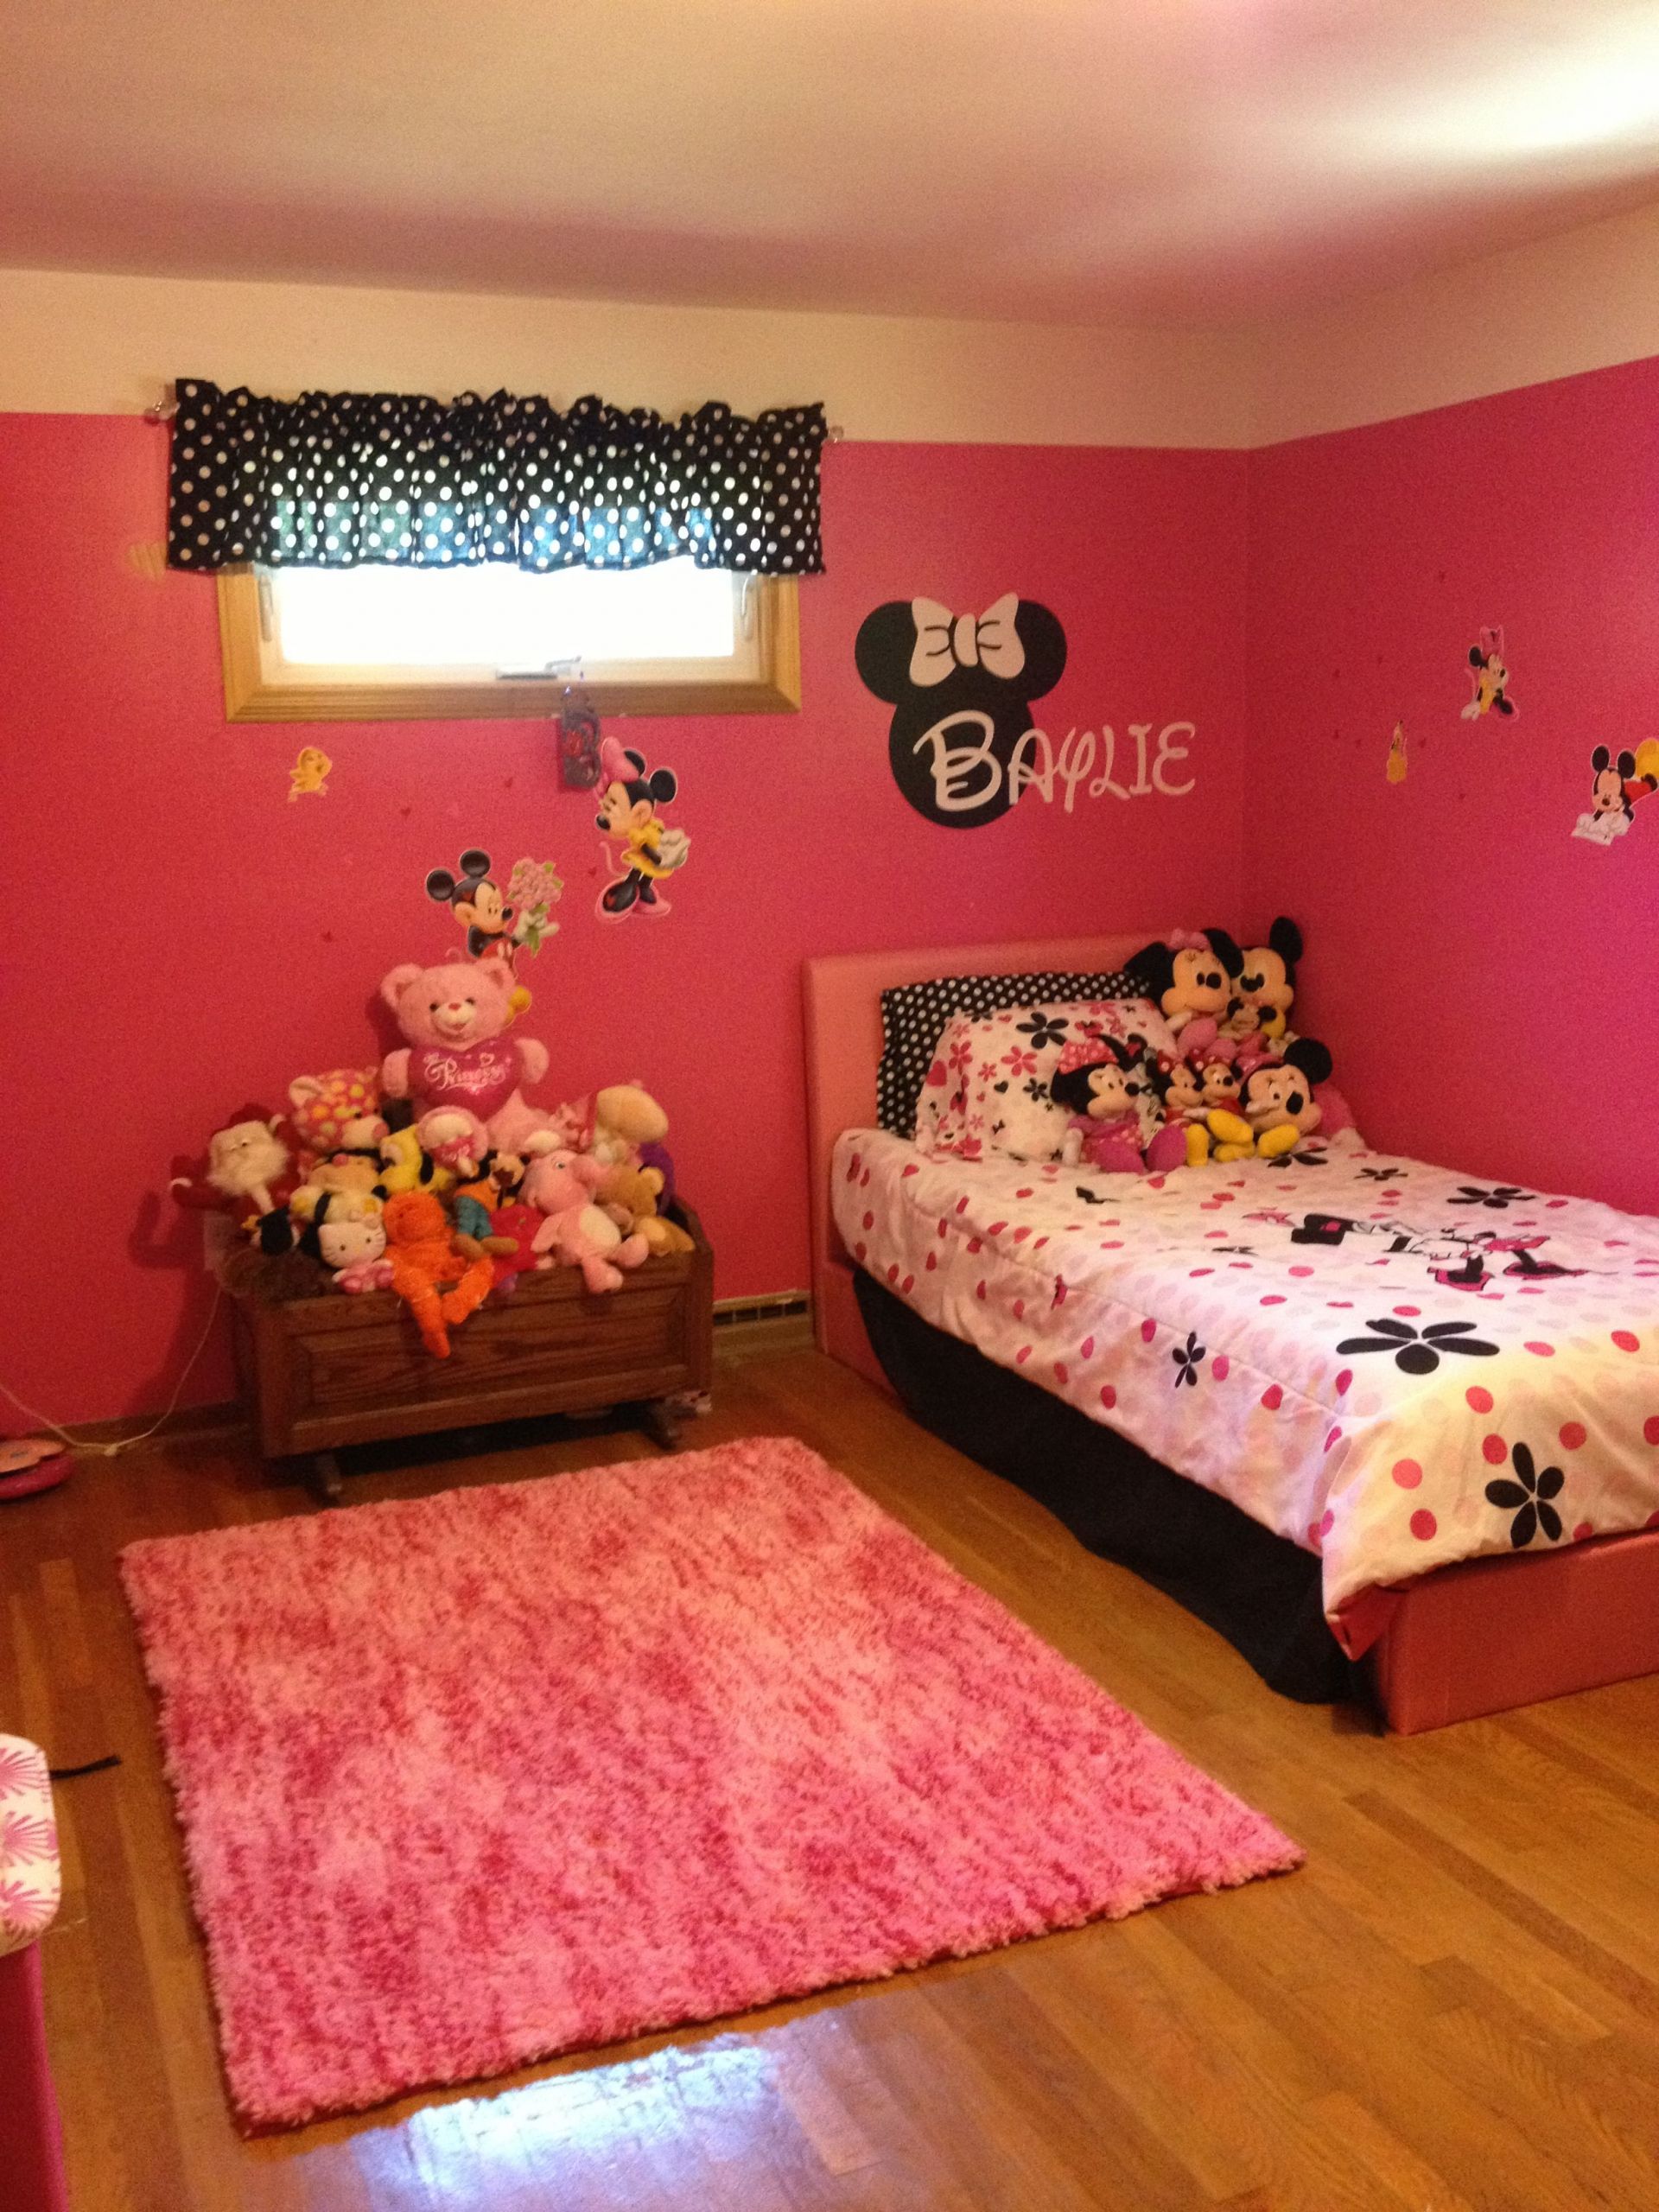 Minnie Mouse Baby Room Decor
 Minnie Mouse Bedroom